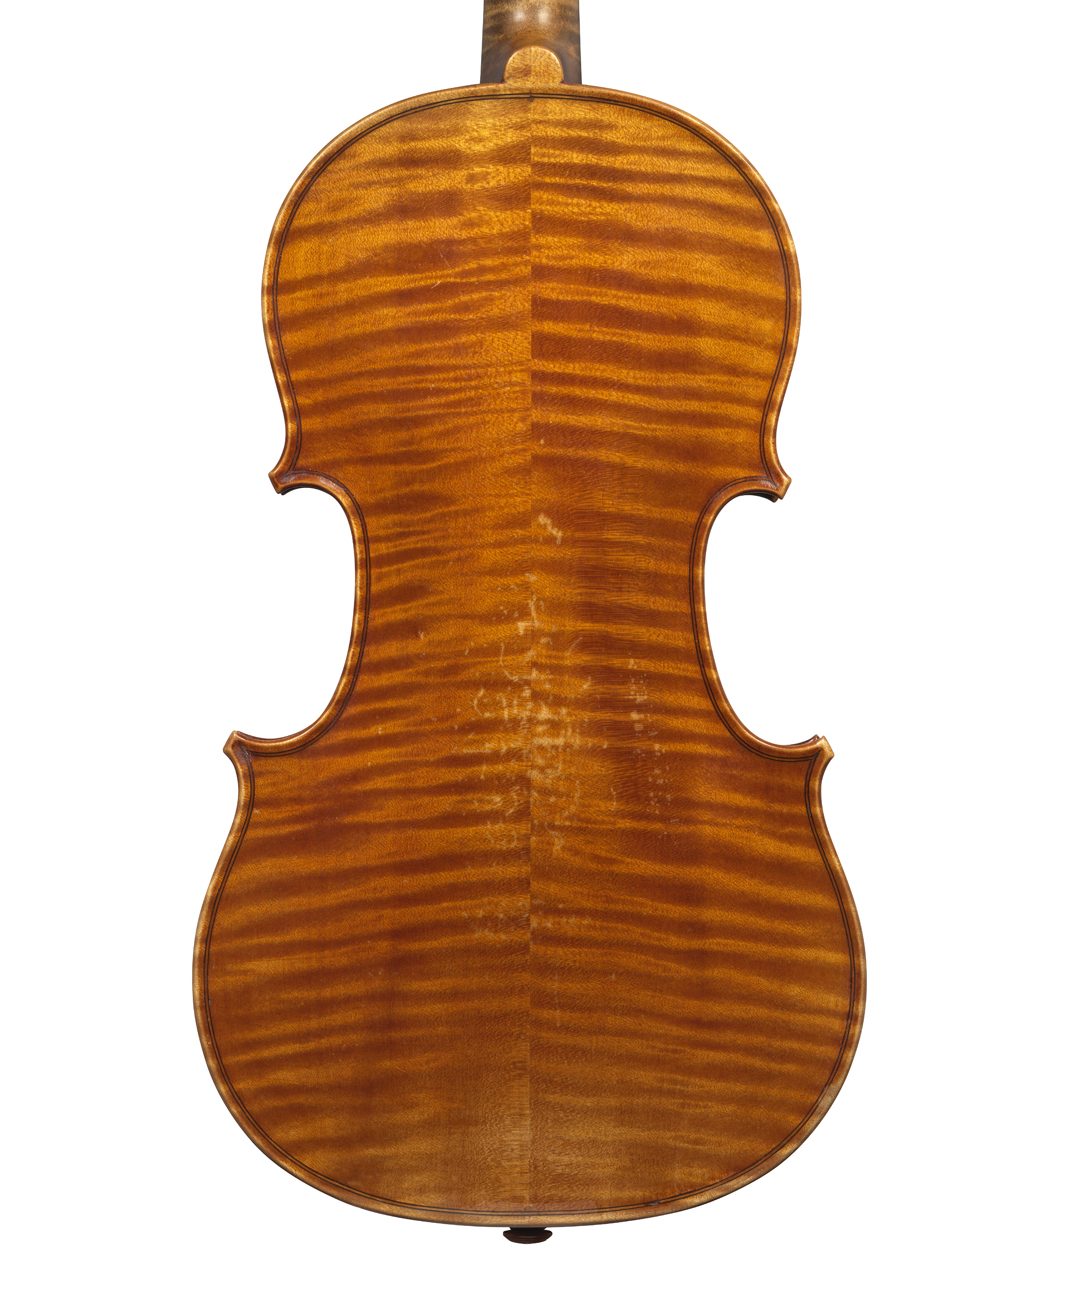 A copy of the Messiah Stradivari by Vuillaume